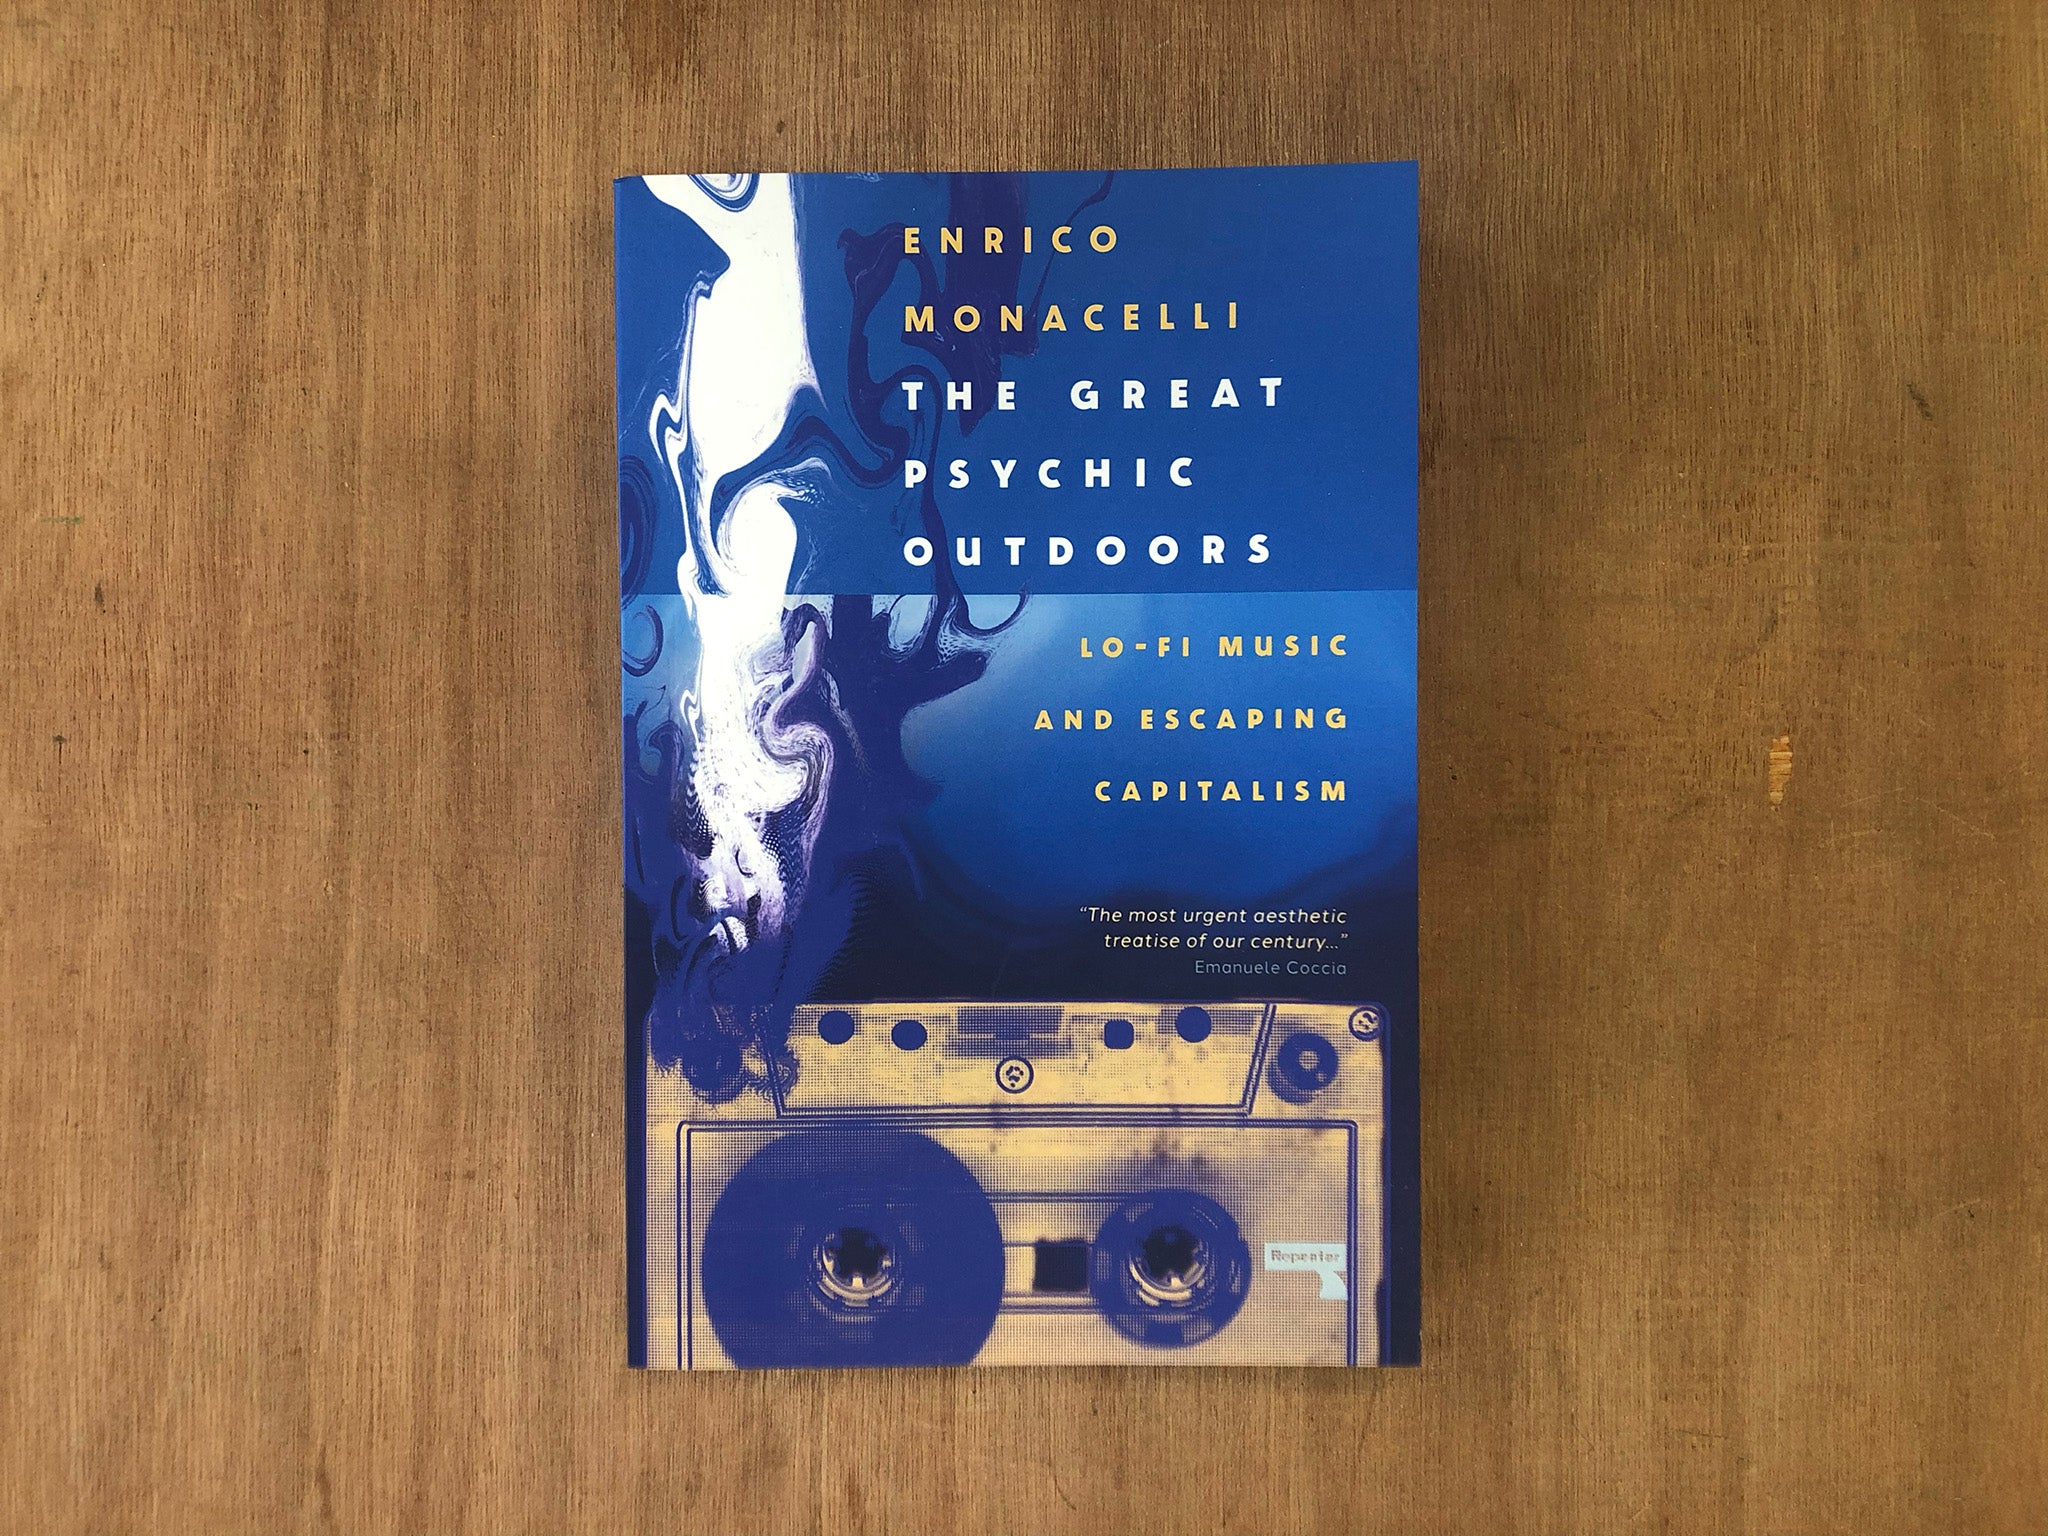 THE GREAT PSYCHIC OUTDOORS: LO-FI MUSIC AND ESCAPING CAPITALISM by Enrico Monacelli